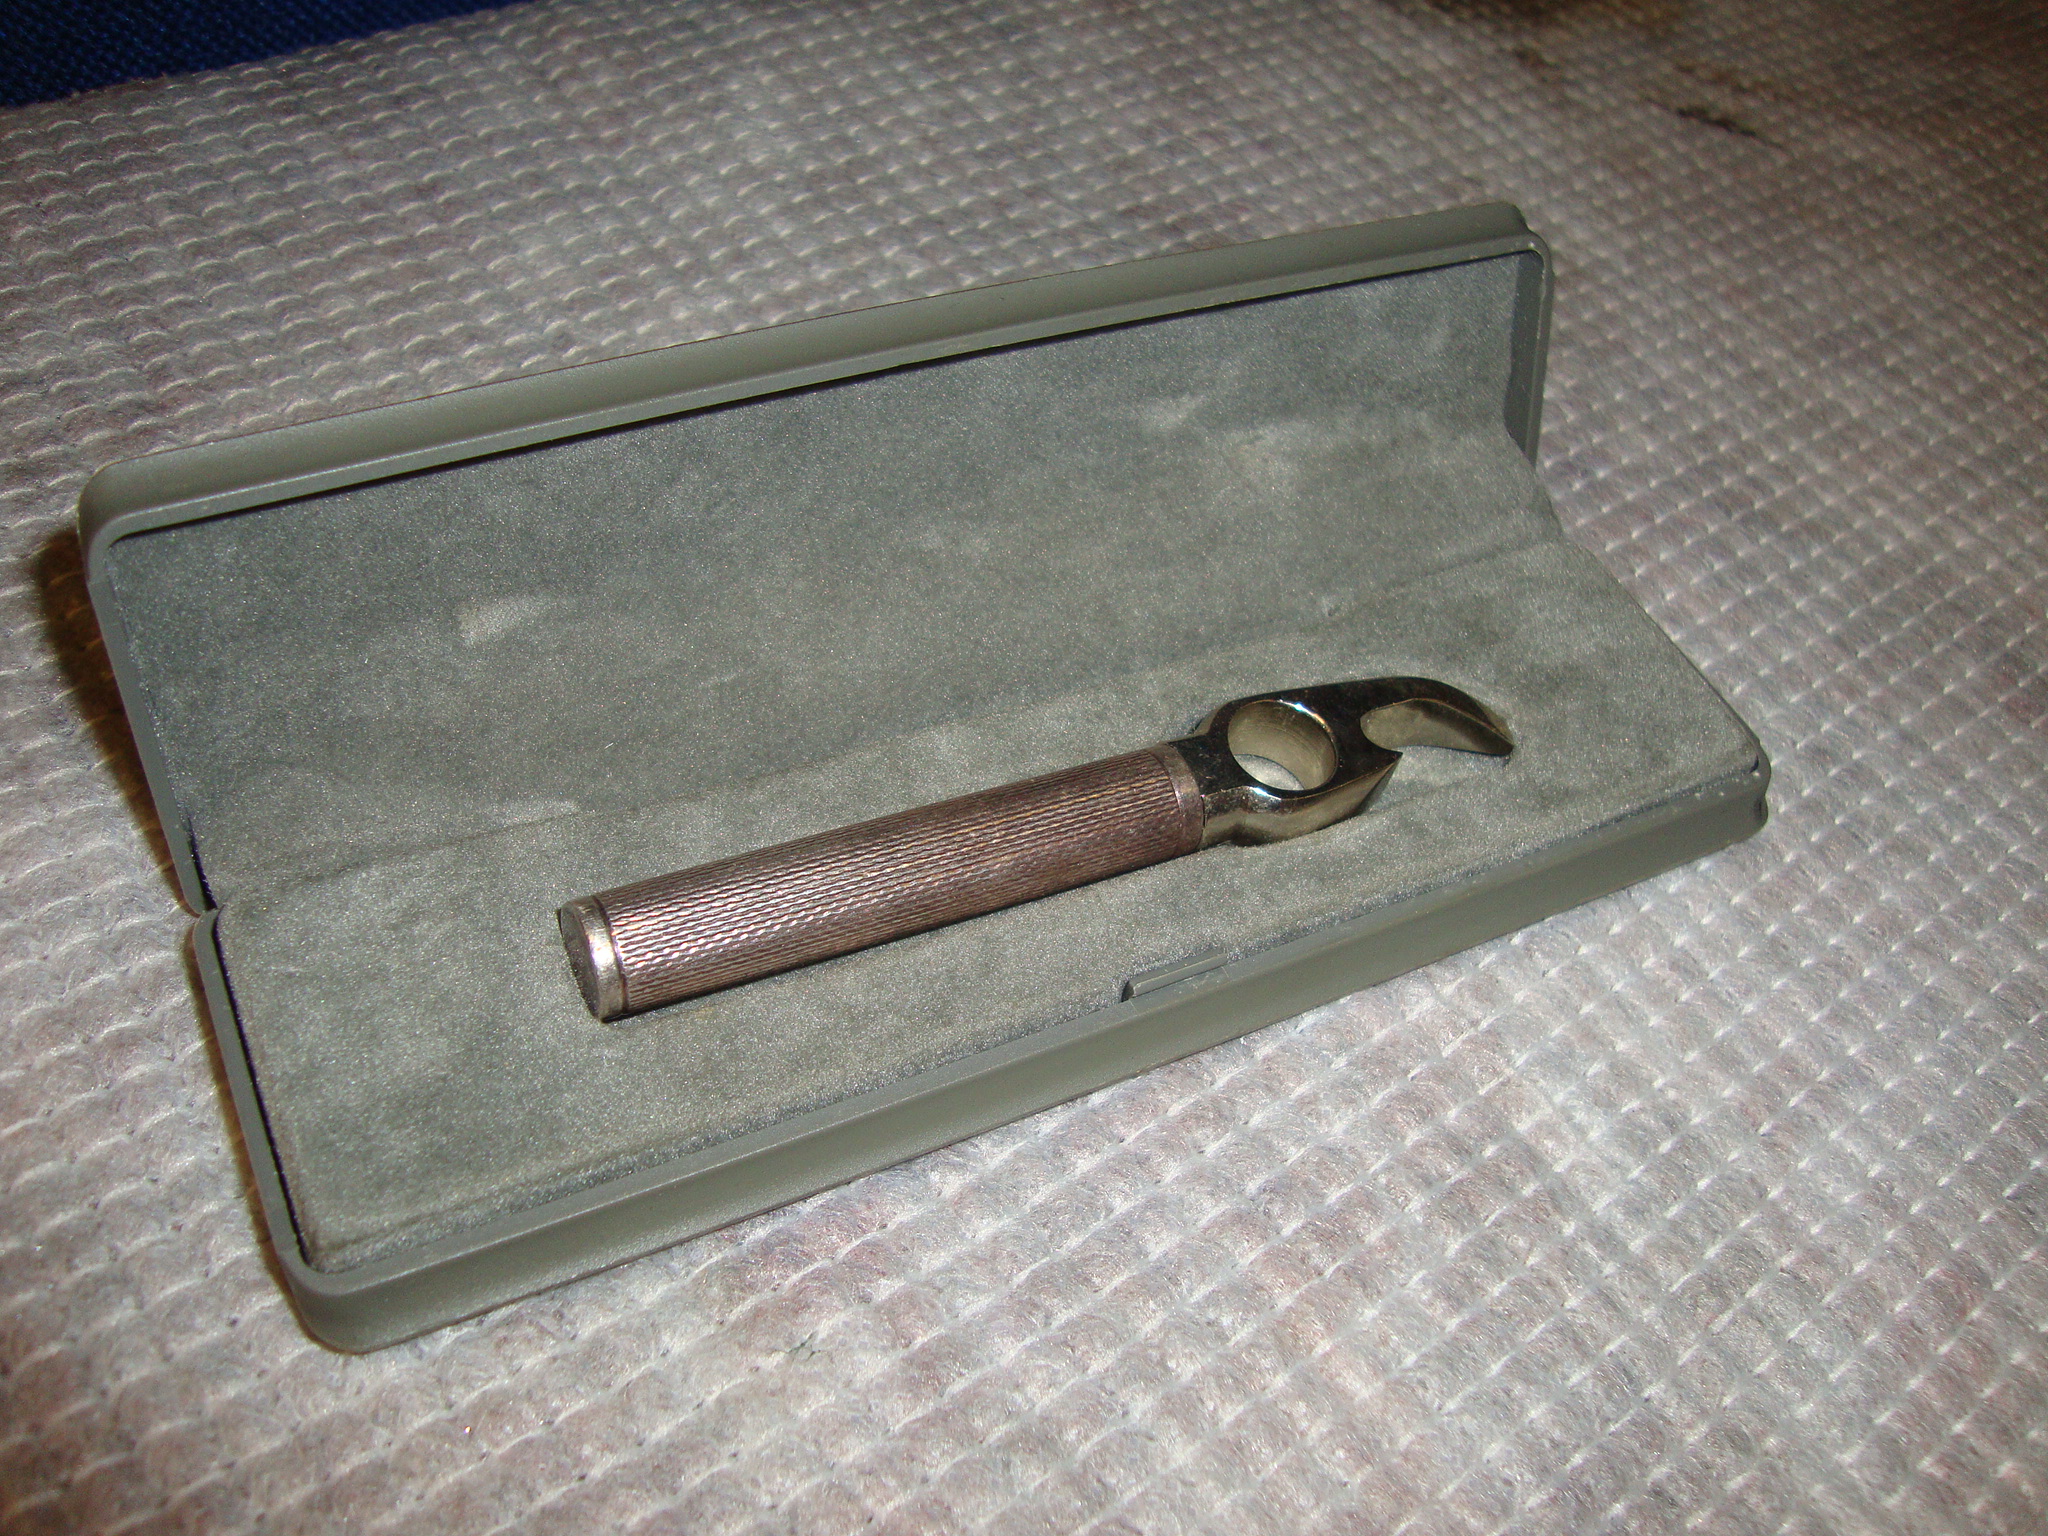 Silver 2-piece travel corkscrew in presentation case, understood to be made by Mappin & Webb however